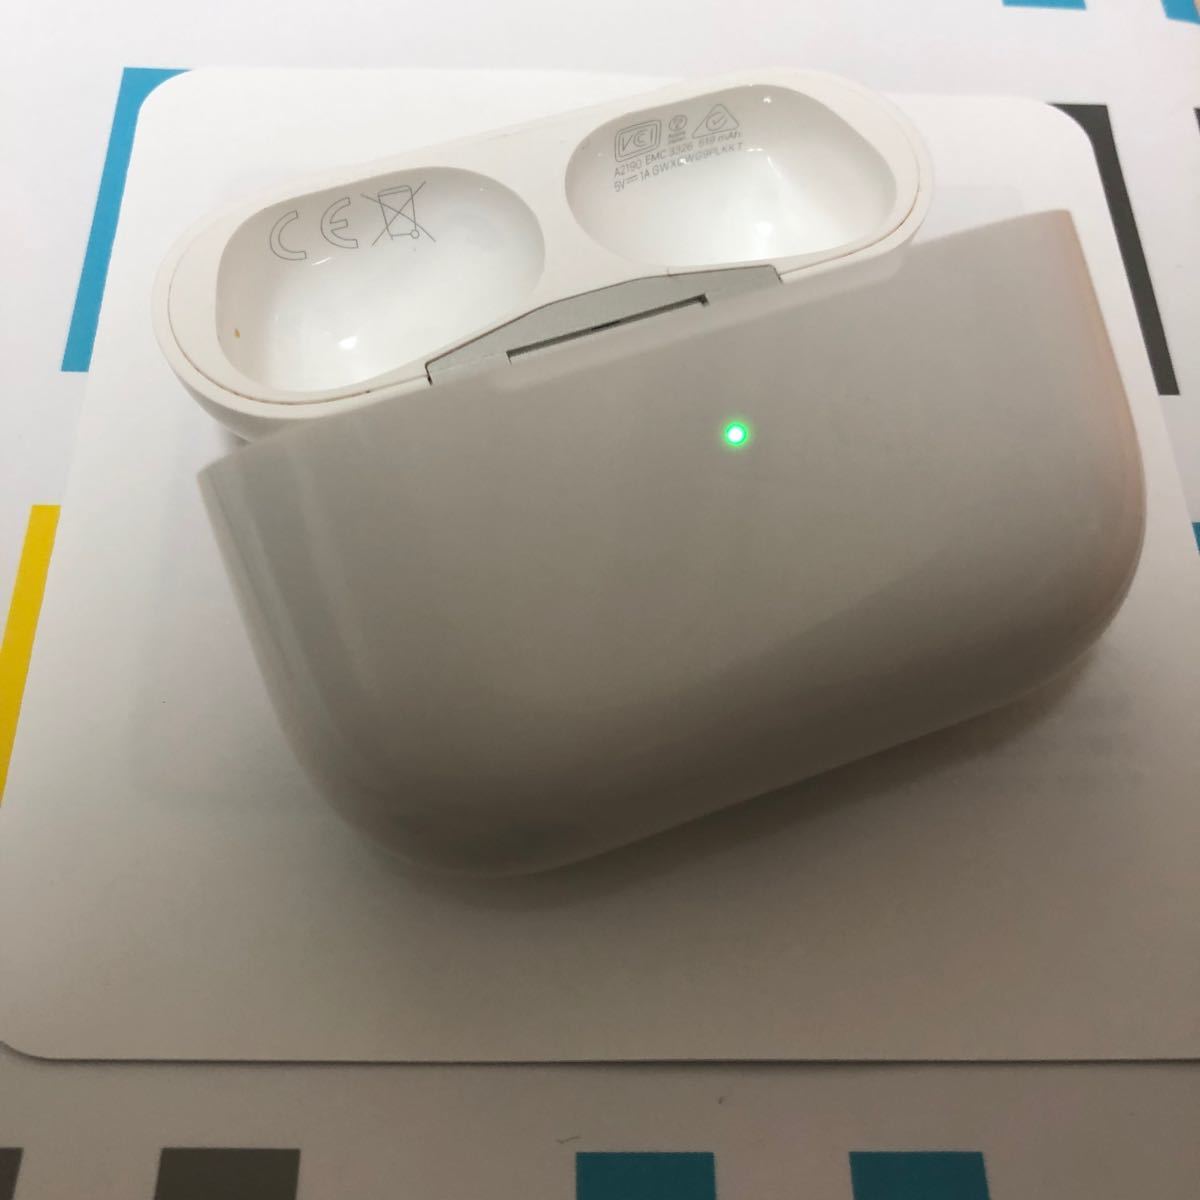 AirPods Pro 充電器 充電ケース 国内正規品 エアーポッズ｜PayPayフリマ